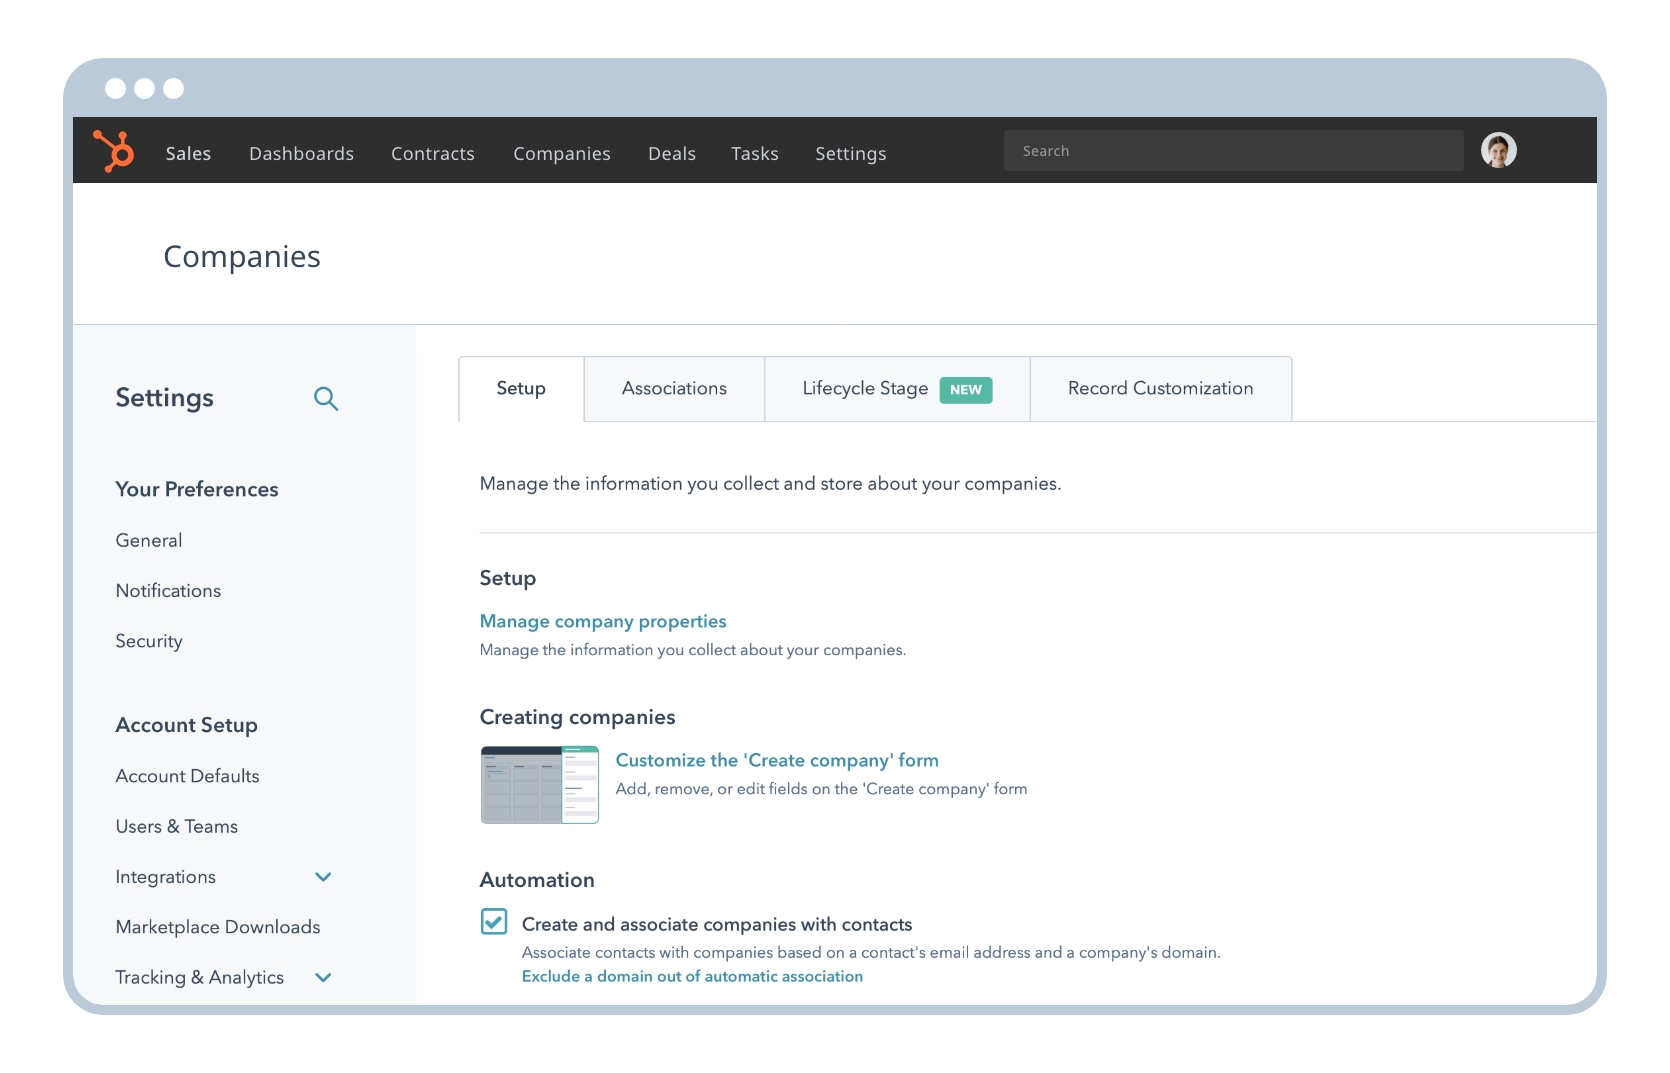 Automation settings for companies on the HubSpot platform.